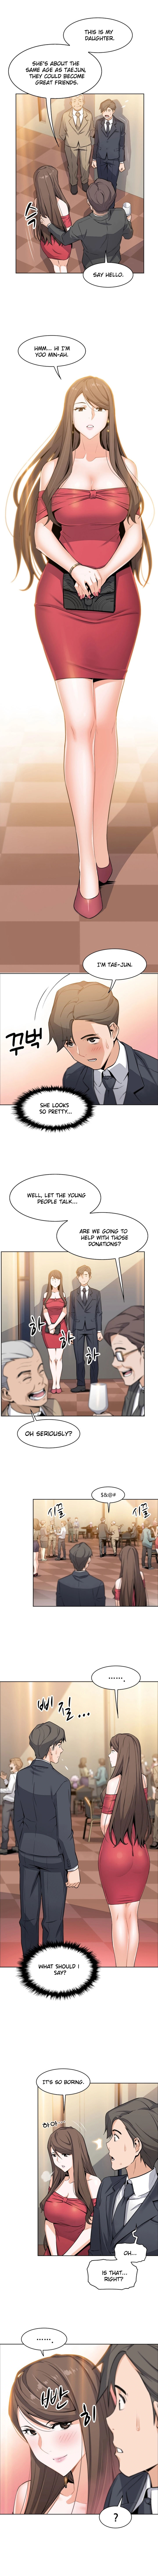 Housekeeper Manhwa - Chapter 6 Page 9